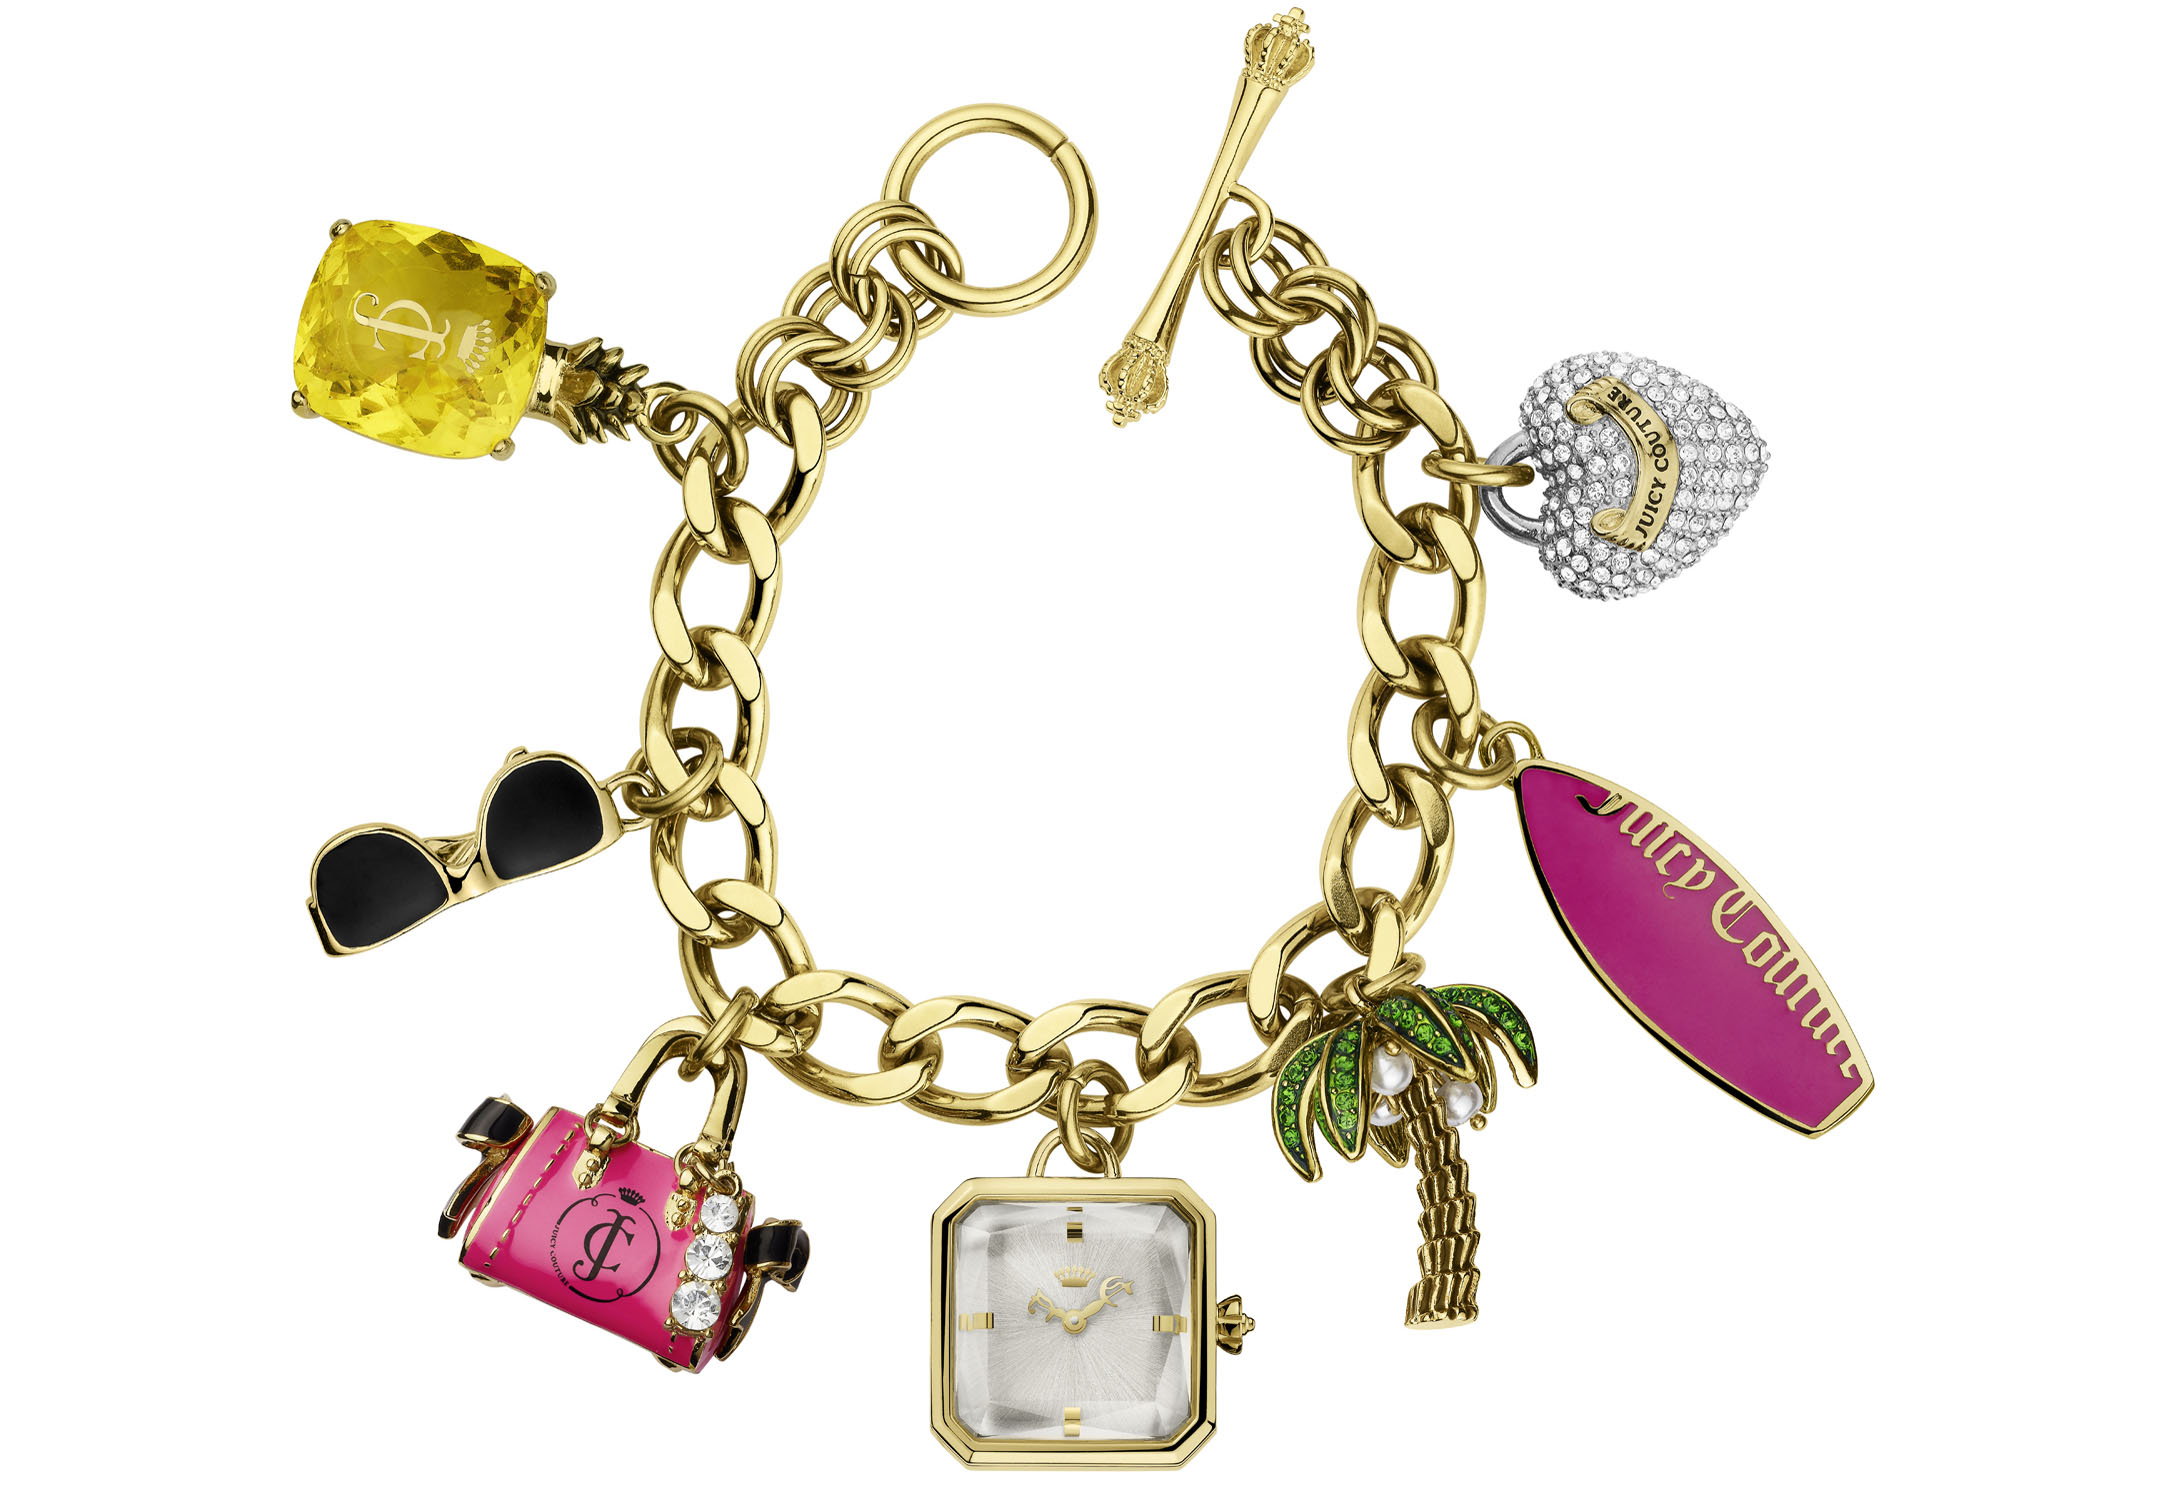 Juicy By Juicy Couture Womens Gold Tone Bracelet Watch Jc/5004hpgb -  JCPenney